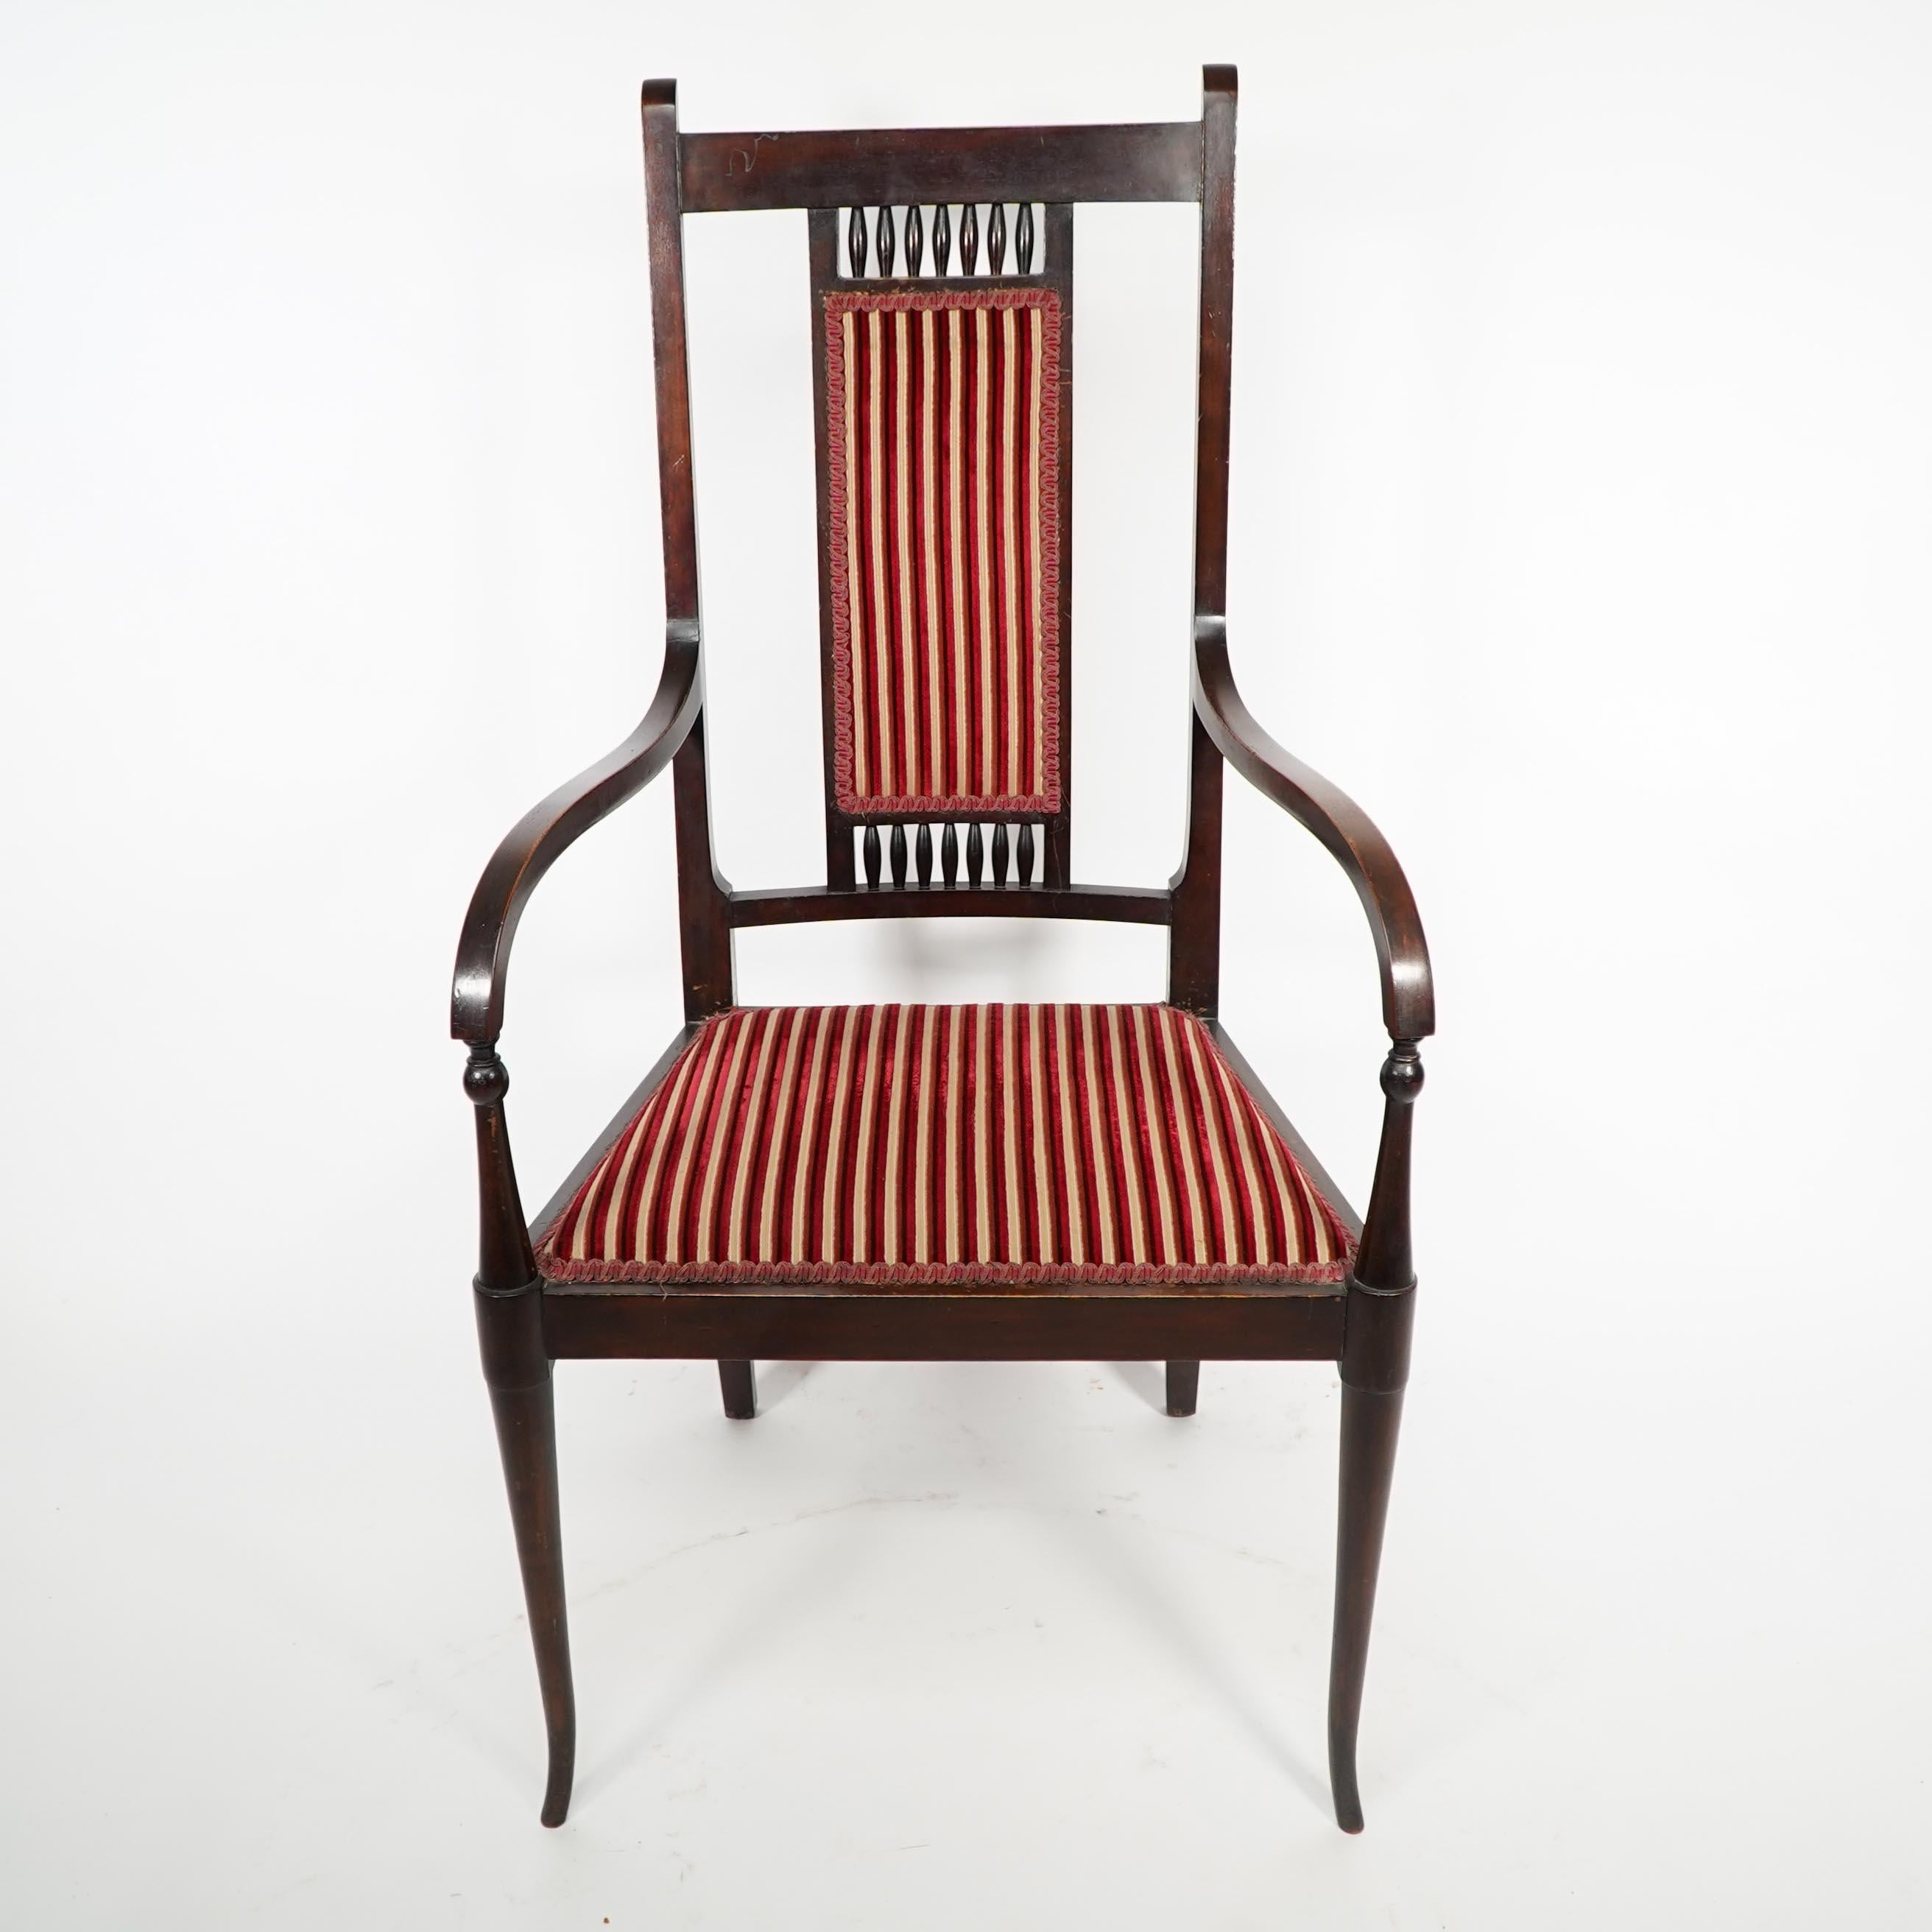 George Walton for John Rowntree's cafe & Miss Cranston tearooms. An Arts and Crafts walnut Armchair. George Walton first designed this armchair which had a cane seat and back, around 1896, the year he began designing the interiors of fashionable tea